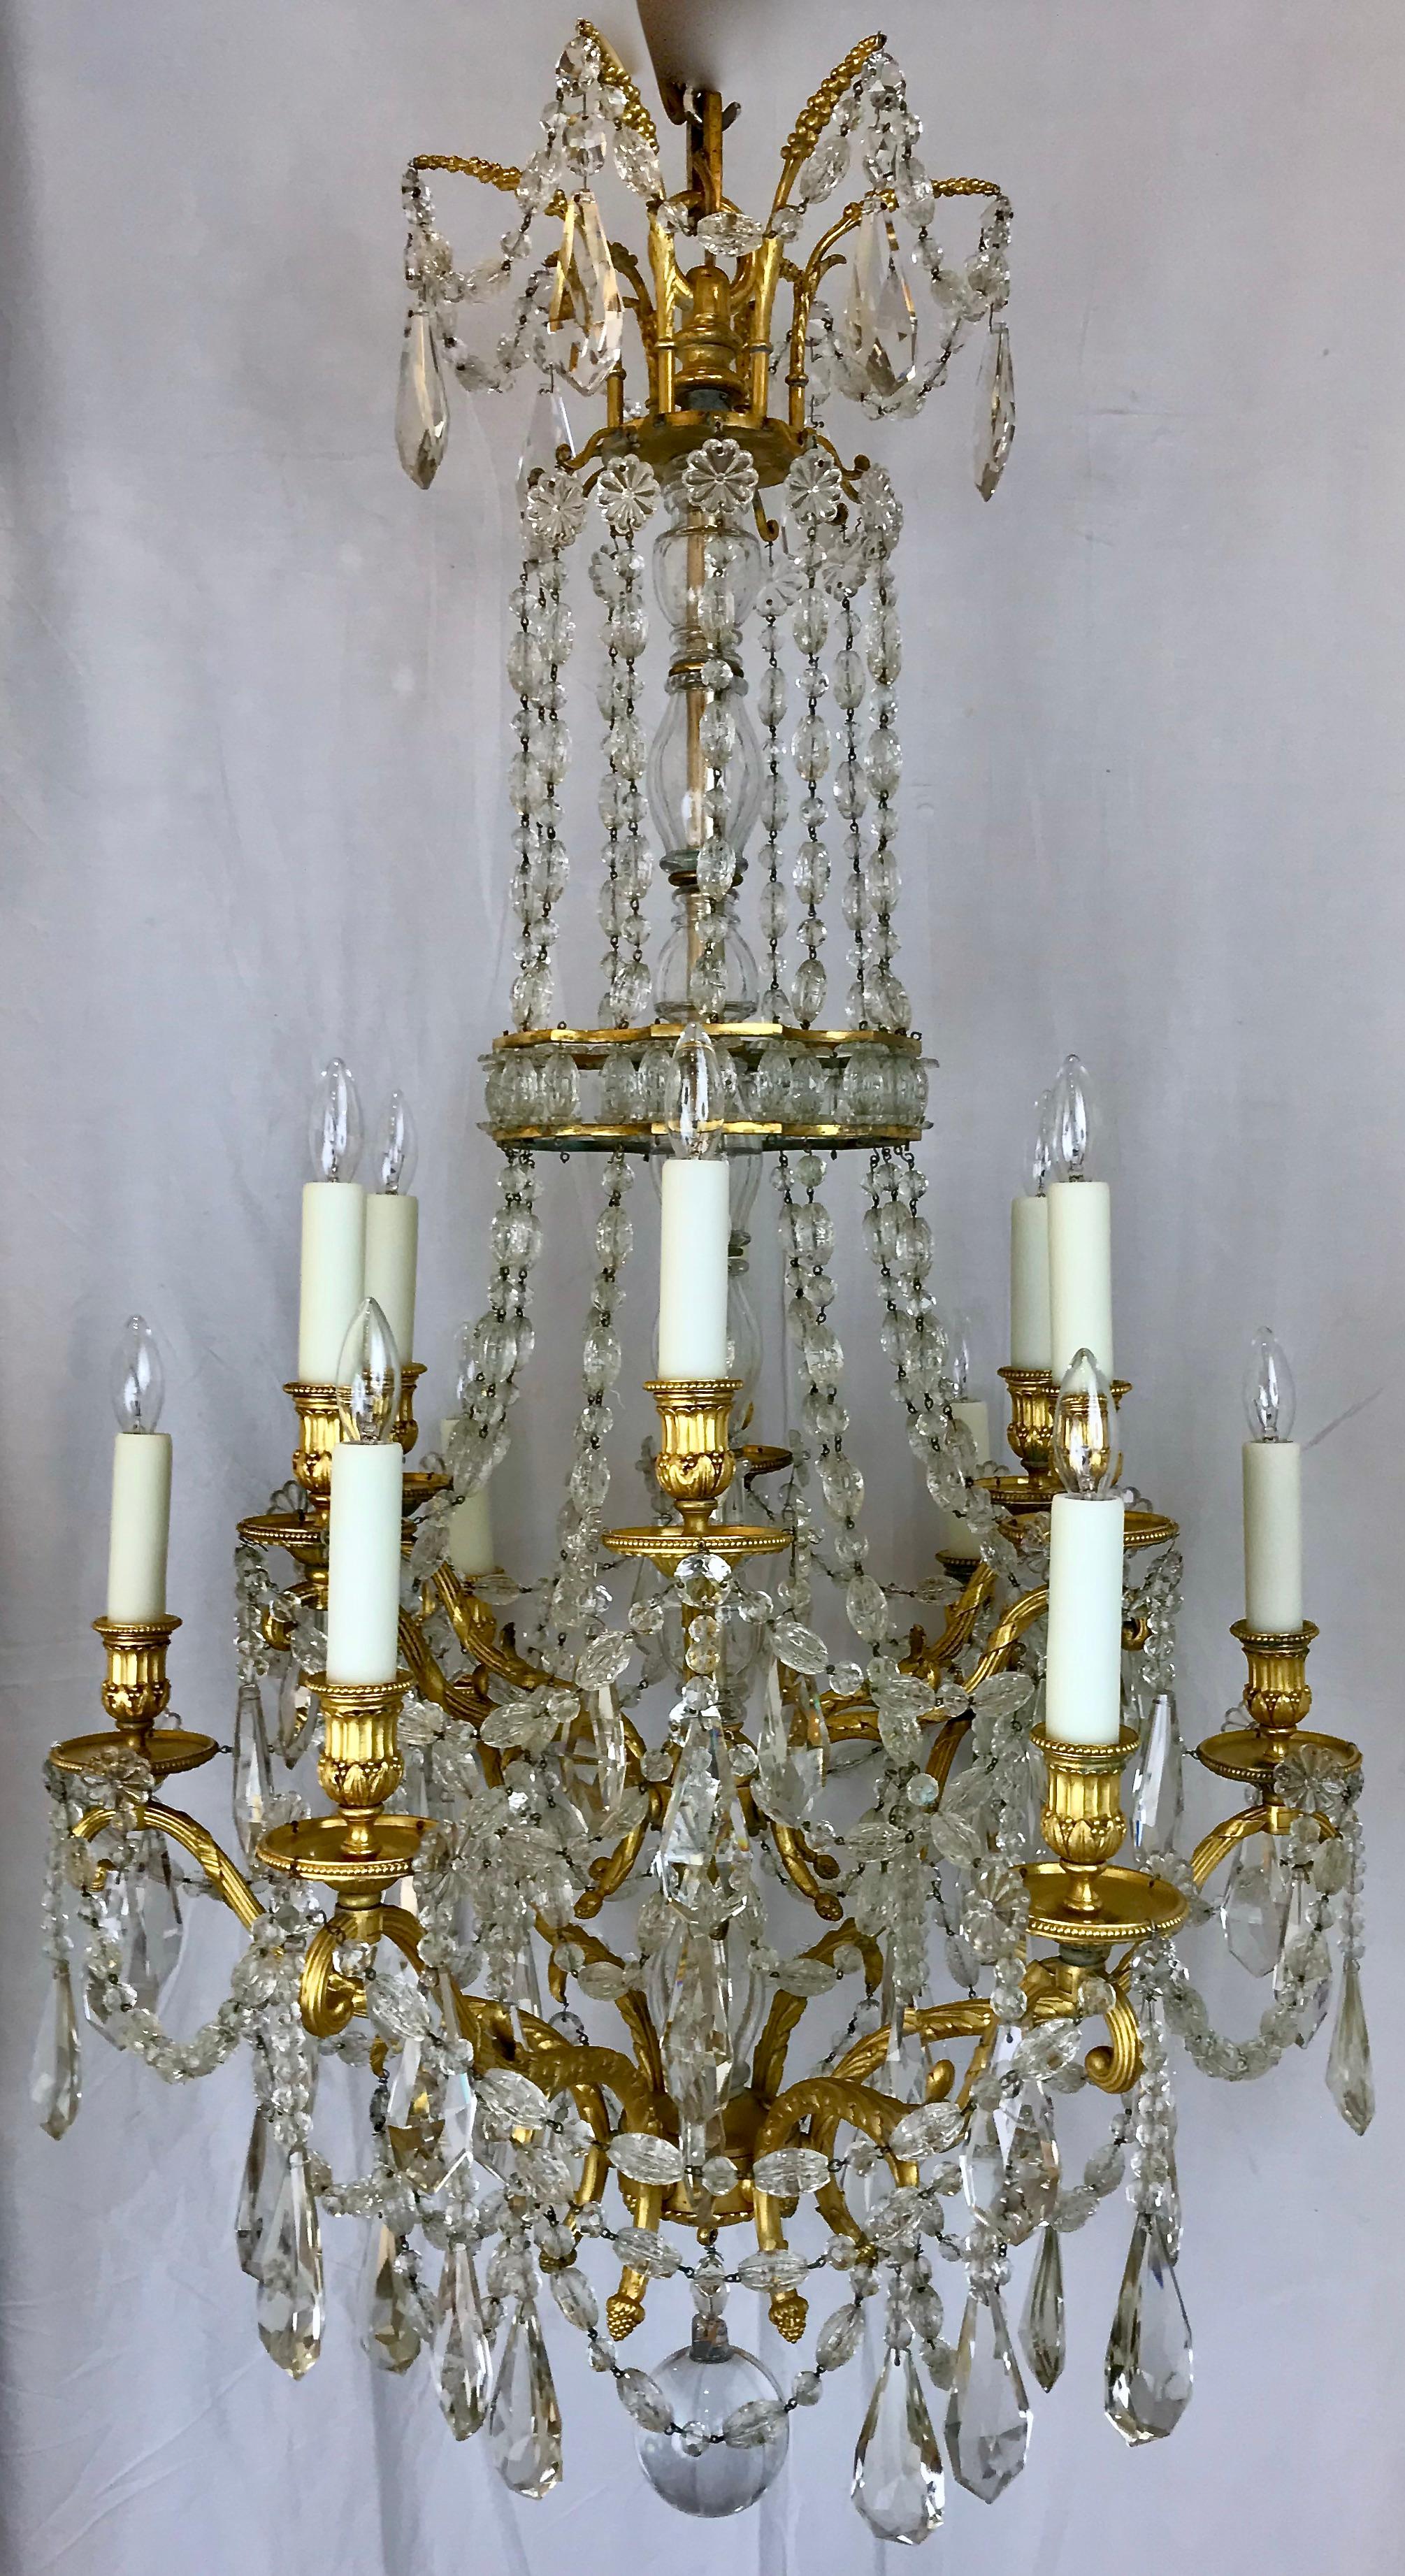 This fabulous signed twelve light gilt bronze and crystal chandelier by Edward F. Caldwell and Company is of the finest quality. It features  beautifully chased Neo-classical motifs including acanthus leaves, acorns and berries. It can be found